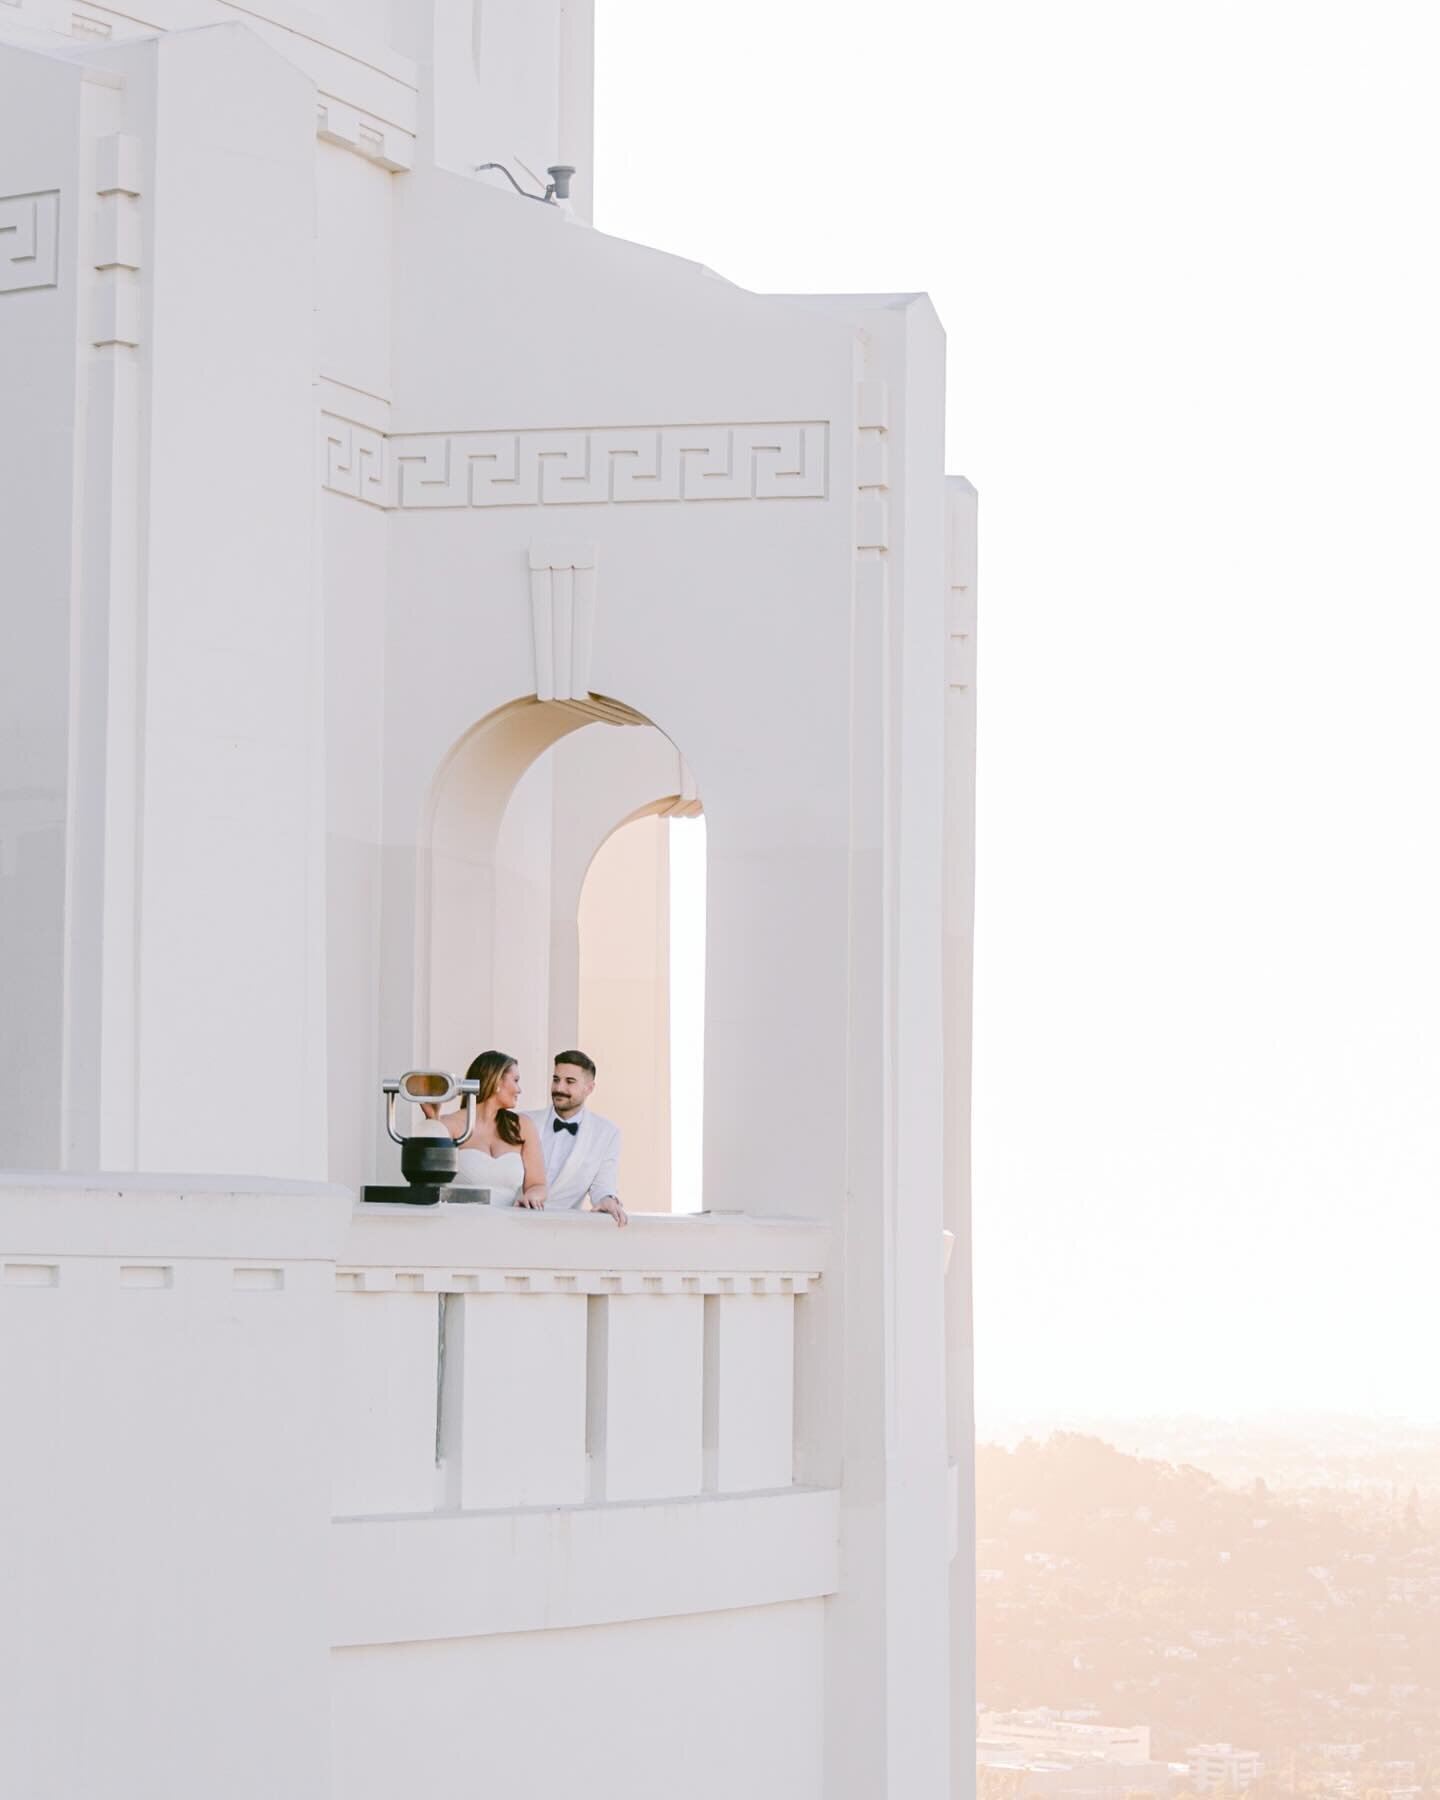 10/10 highly recommend doing a post wedding session (or engagement session) at the Griffith Observatory! 
.
.
Spenser and Trever are such a fun couple and were champs for doing a sunrise session too! This was definitely an enjoyable post wedding sess